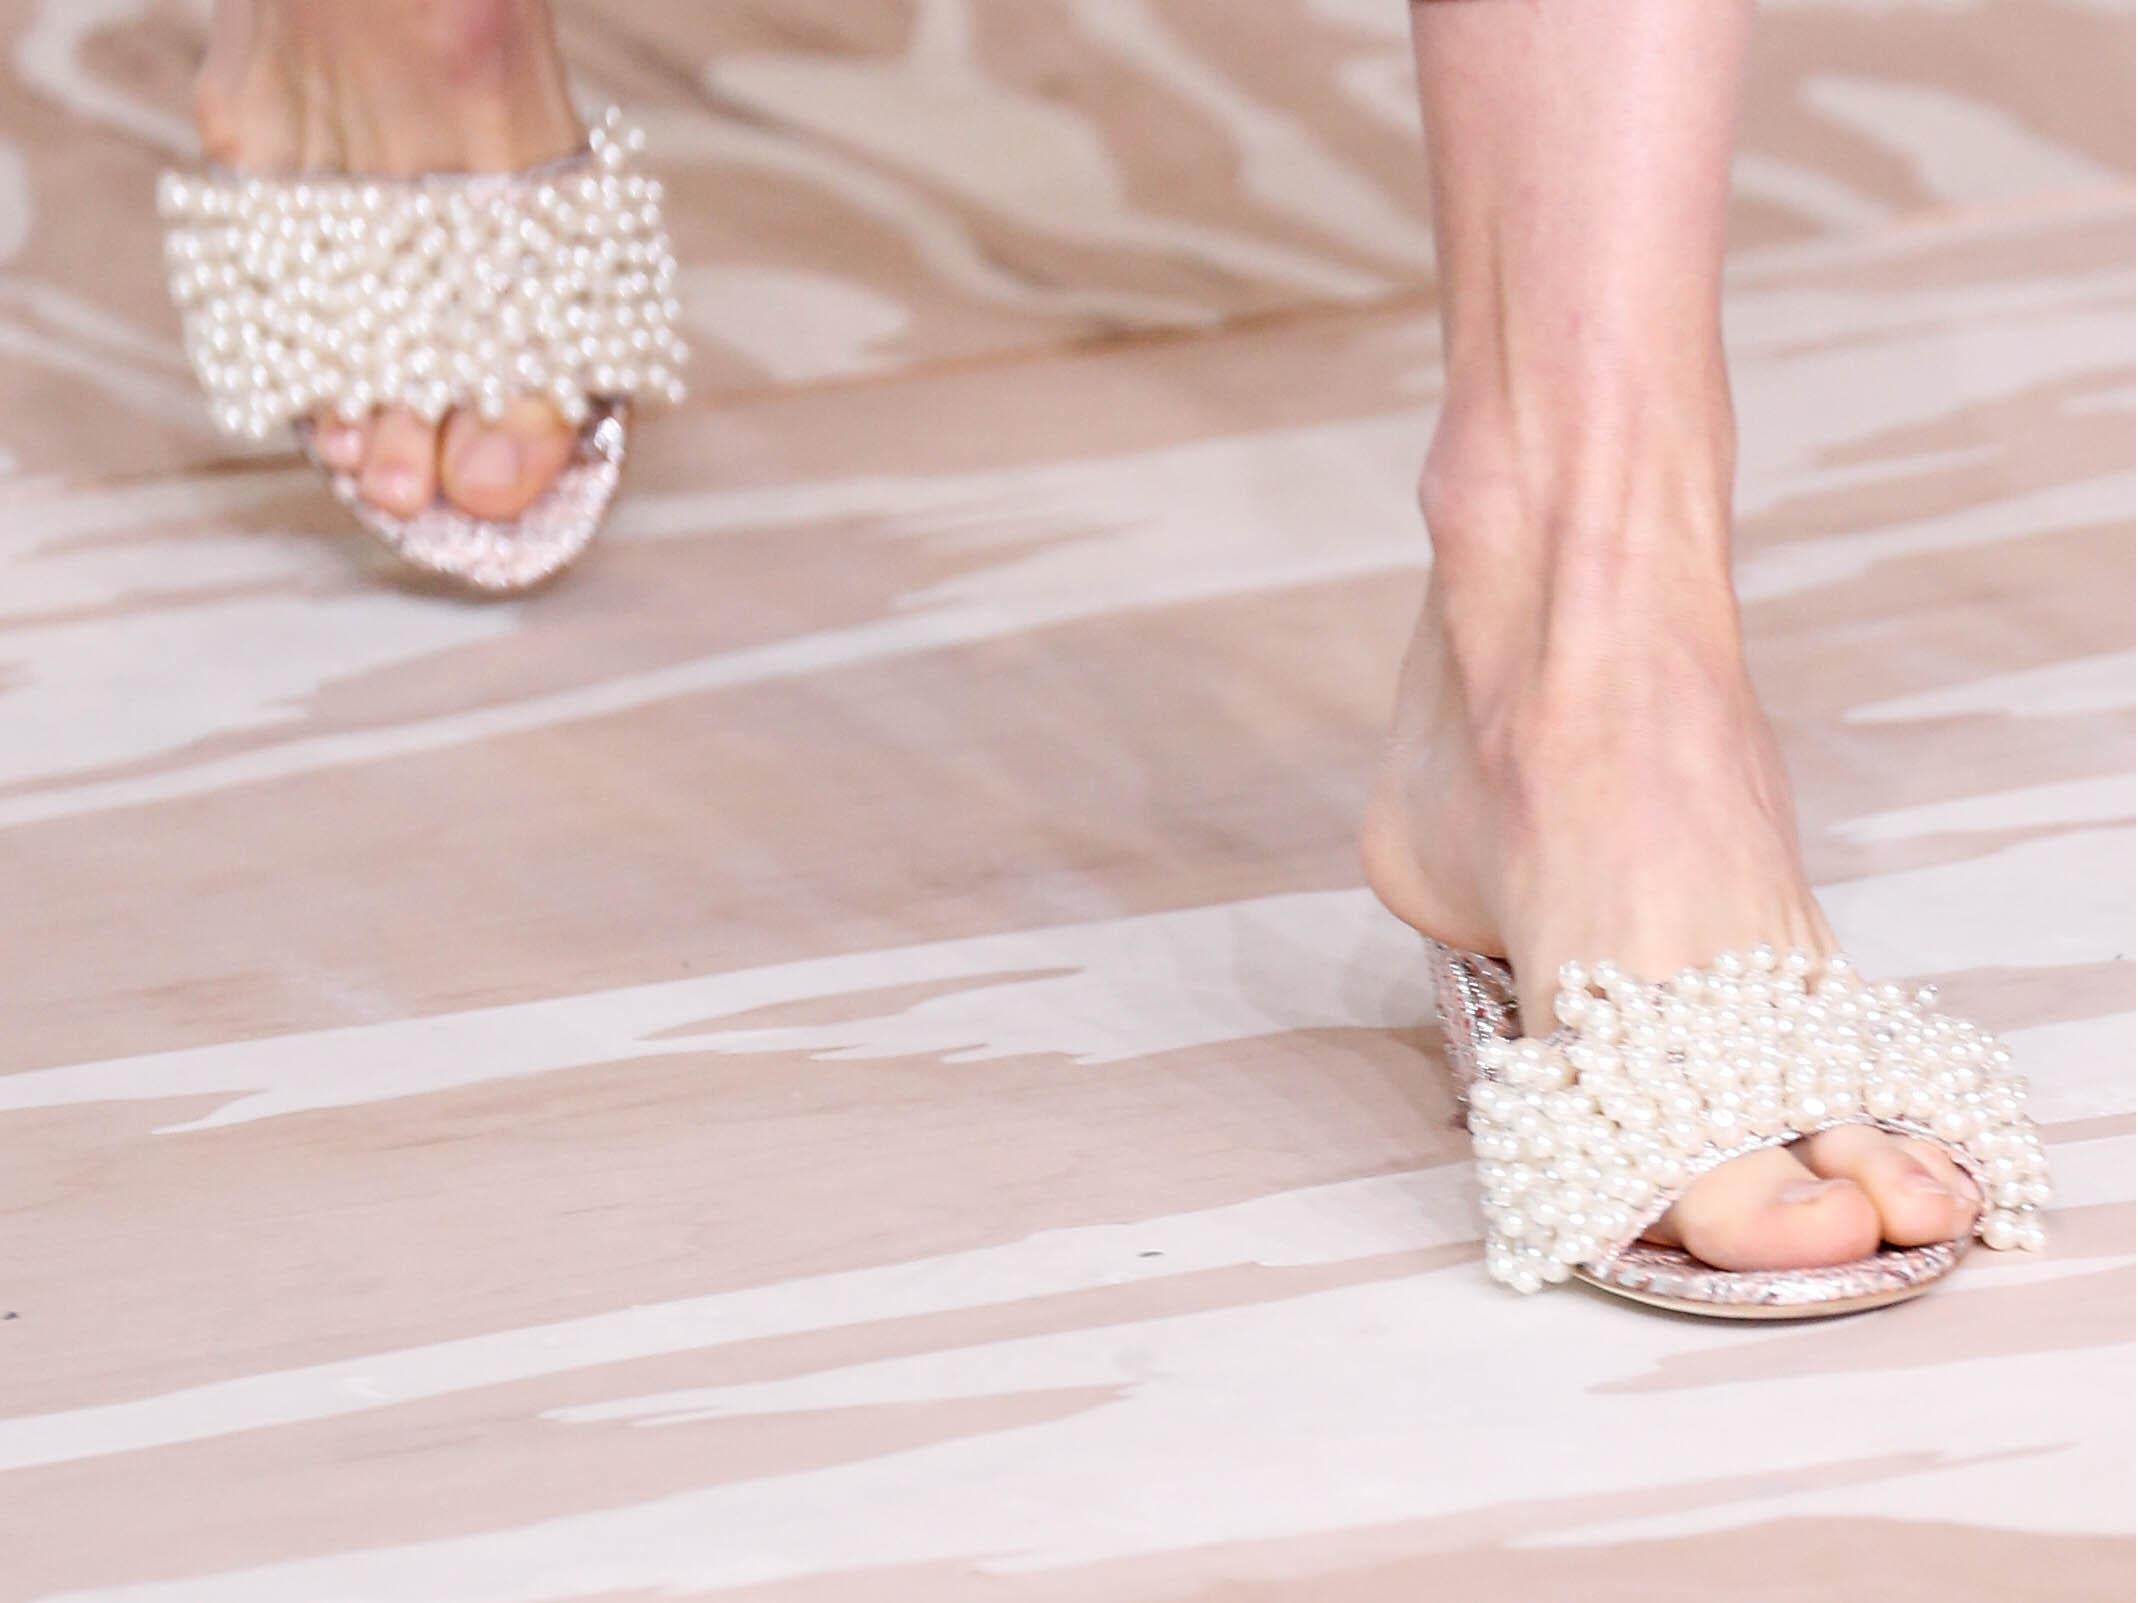 Tory Burch’s slides came covered in clusters of girlish pearls